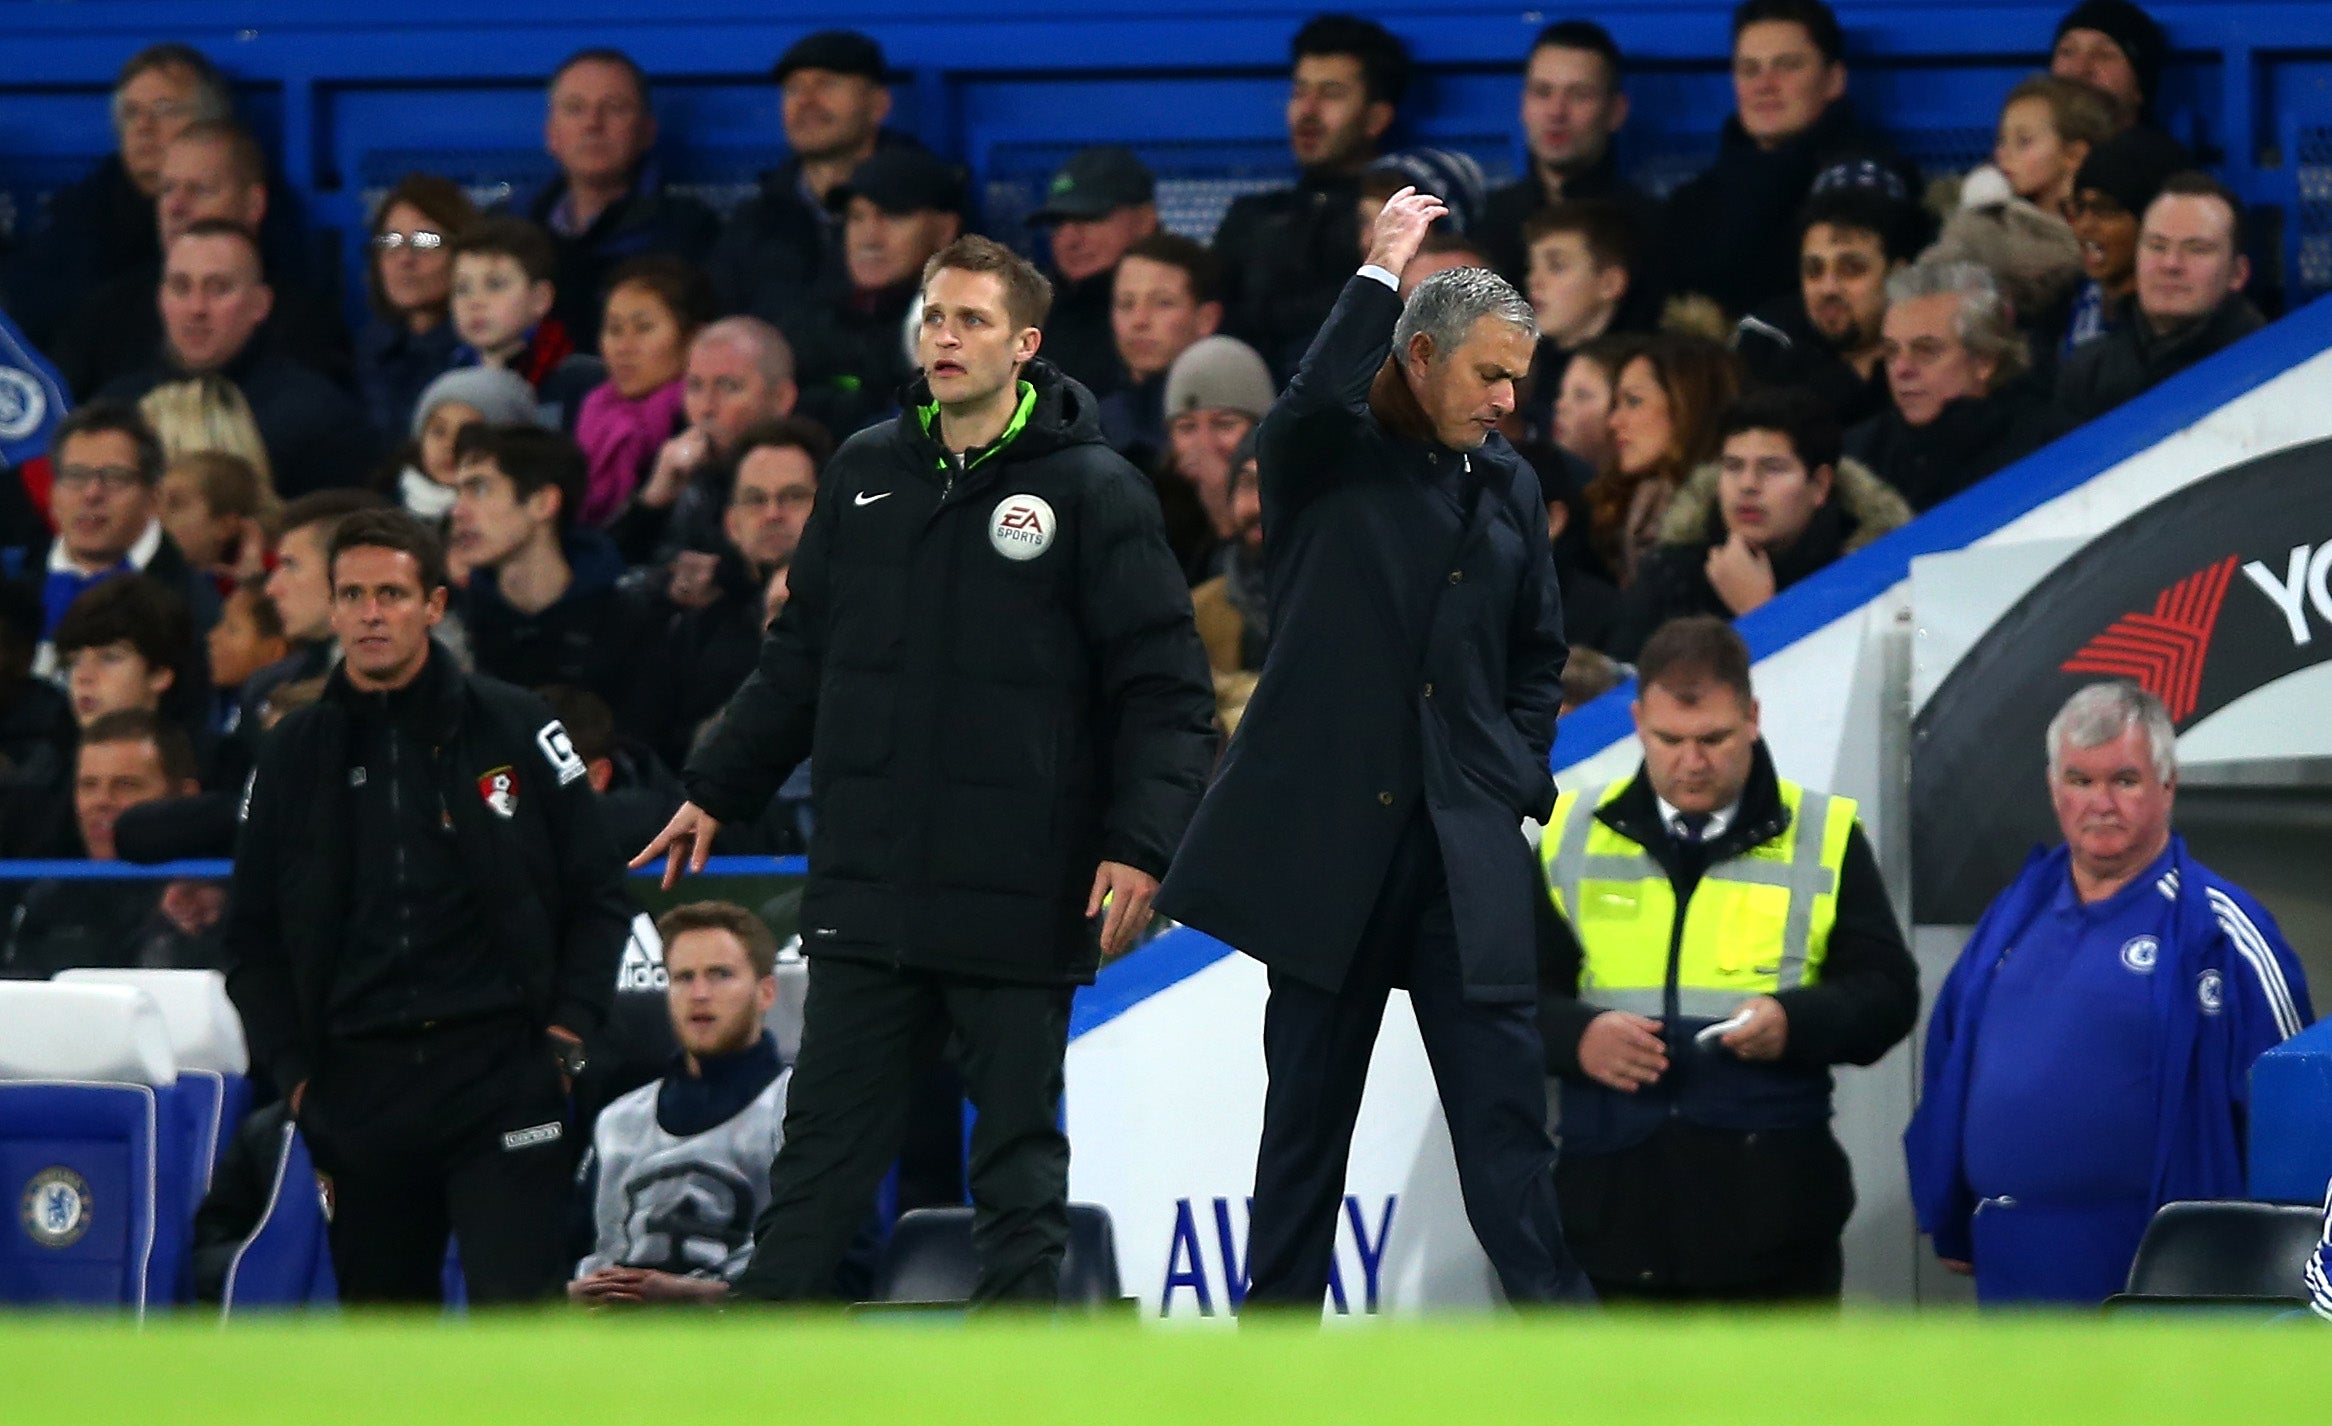 Jose Mourinho is incensed on the sidelines as Chelsea lose again